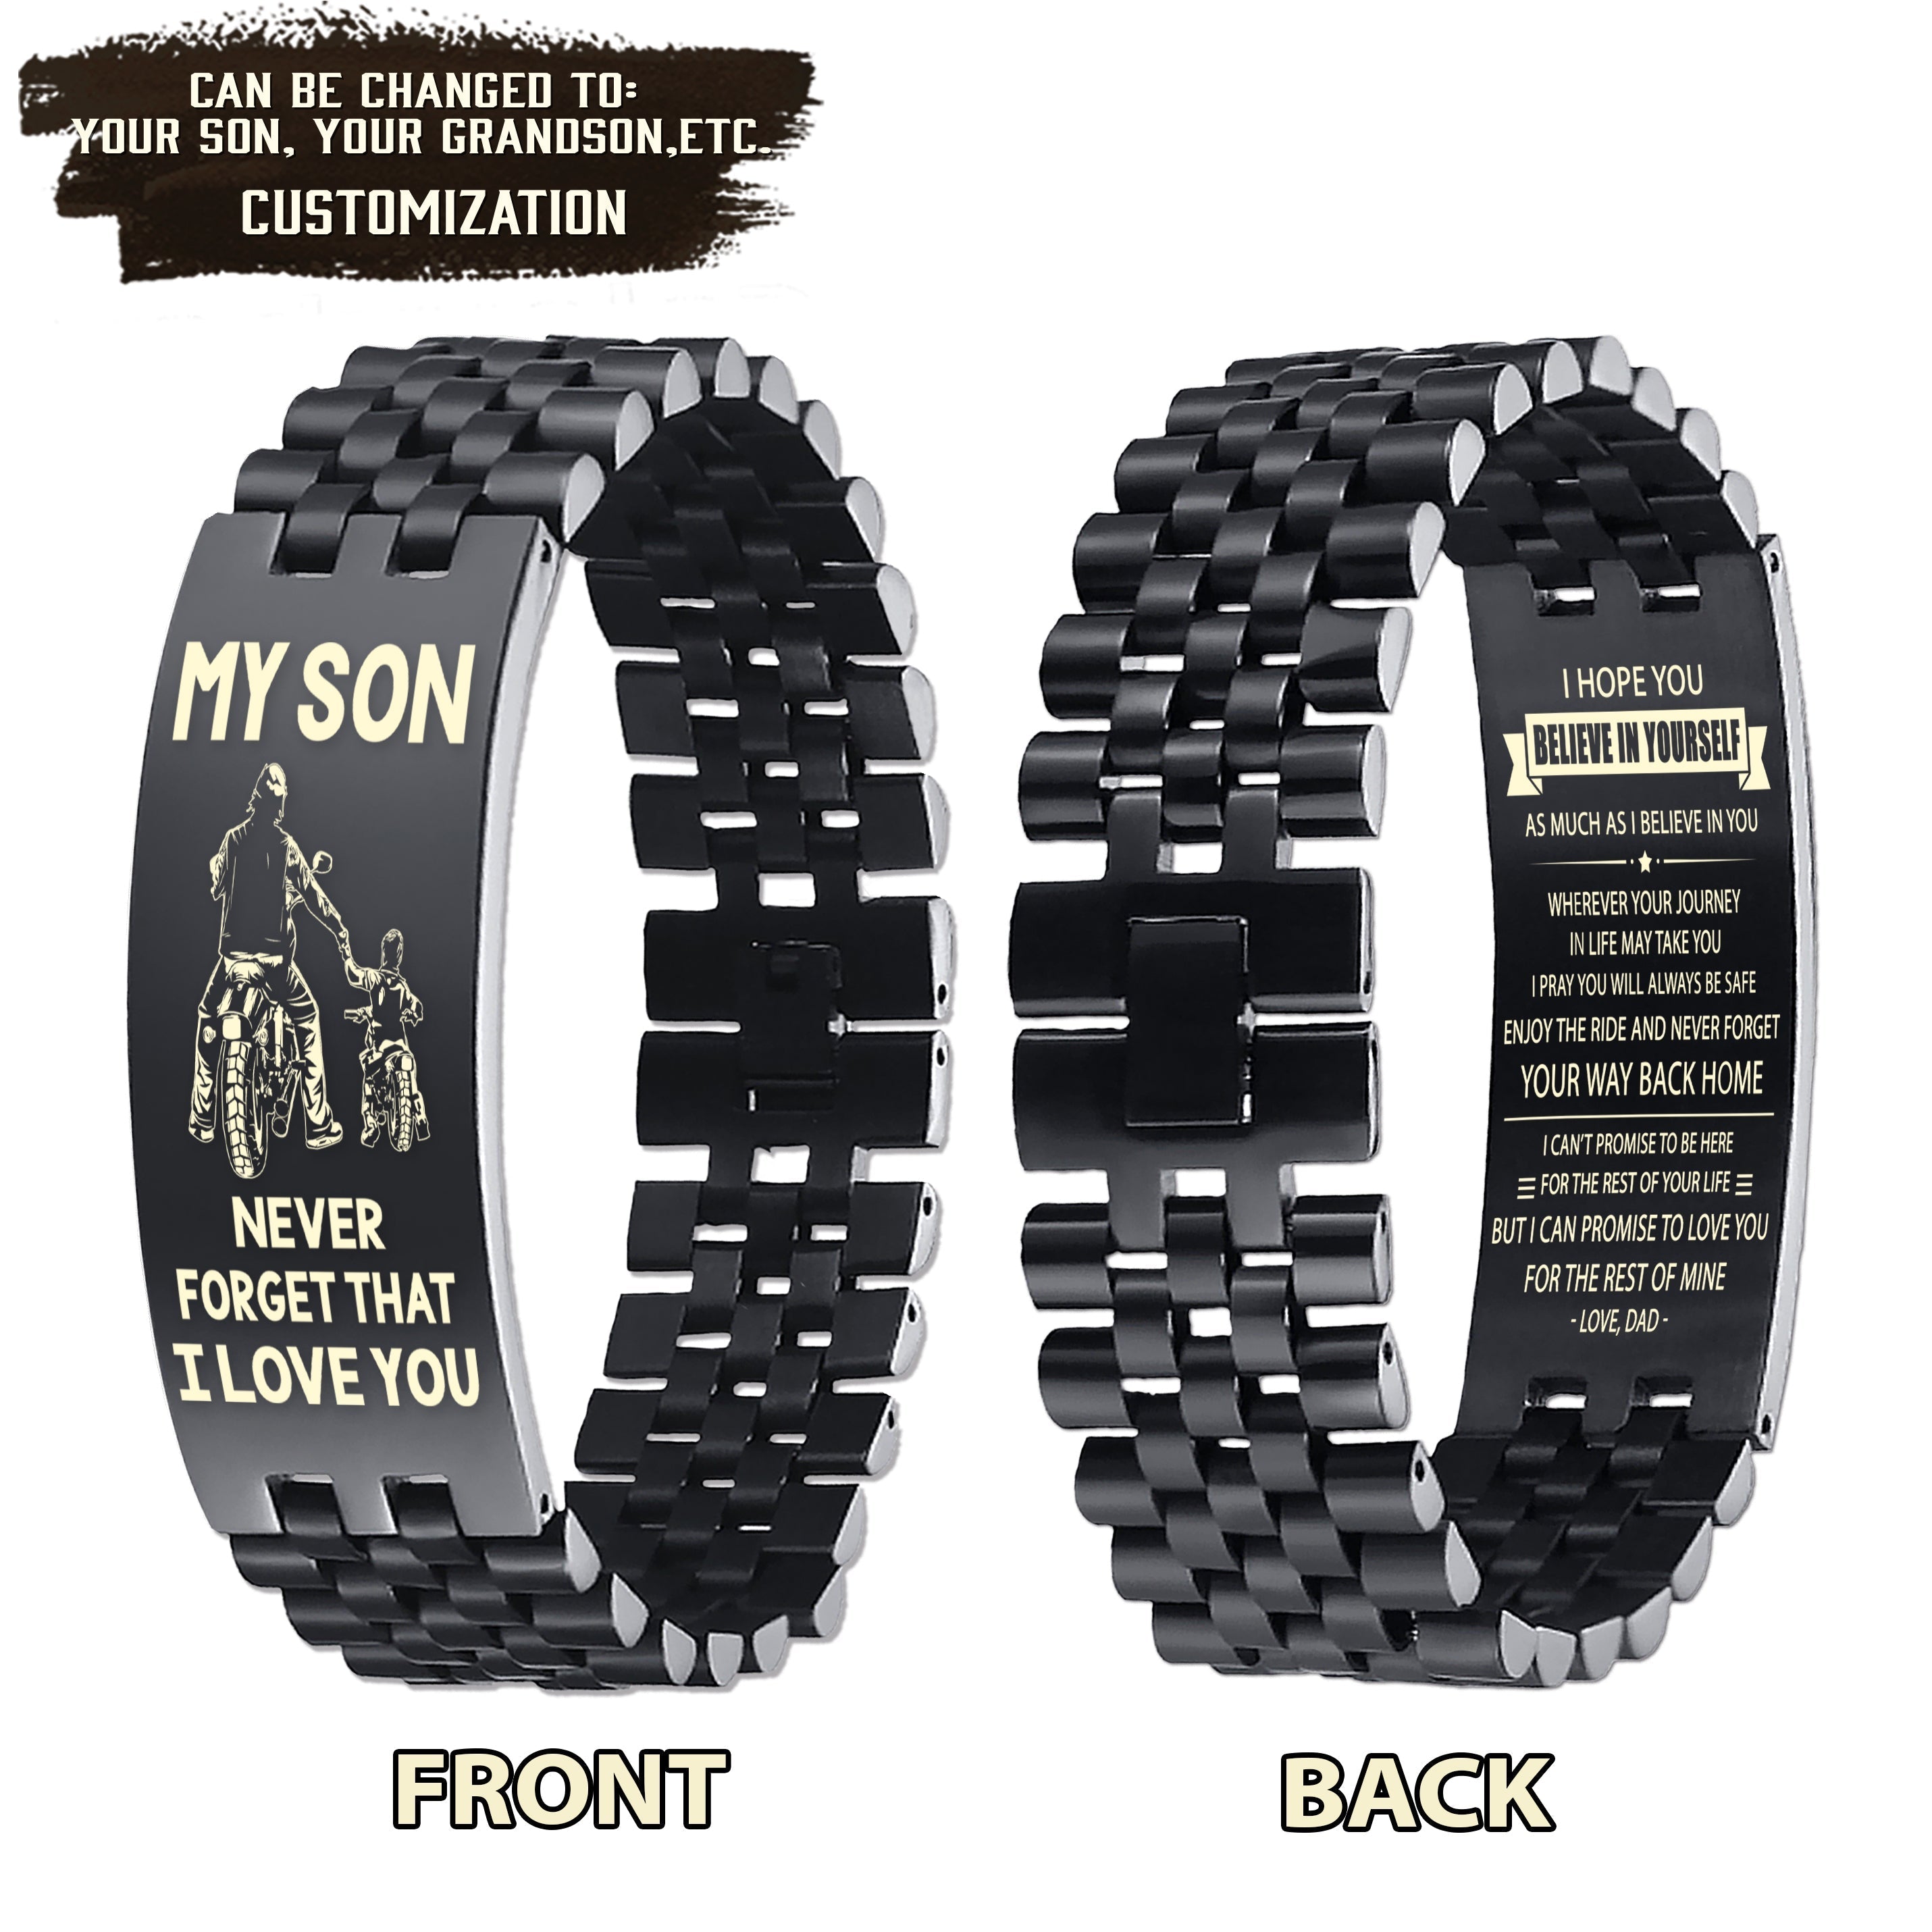 Biker engraved double sided dog tag bracelet gifts from dad to son,It is not about better than someone else, It is about being better than you were the day before, Be strong be brave be humble